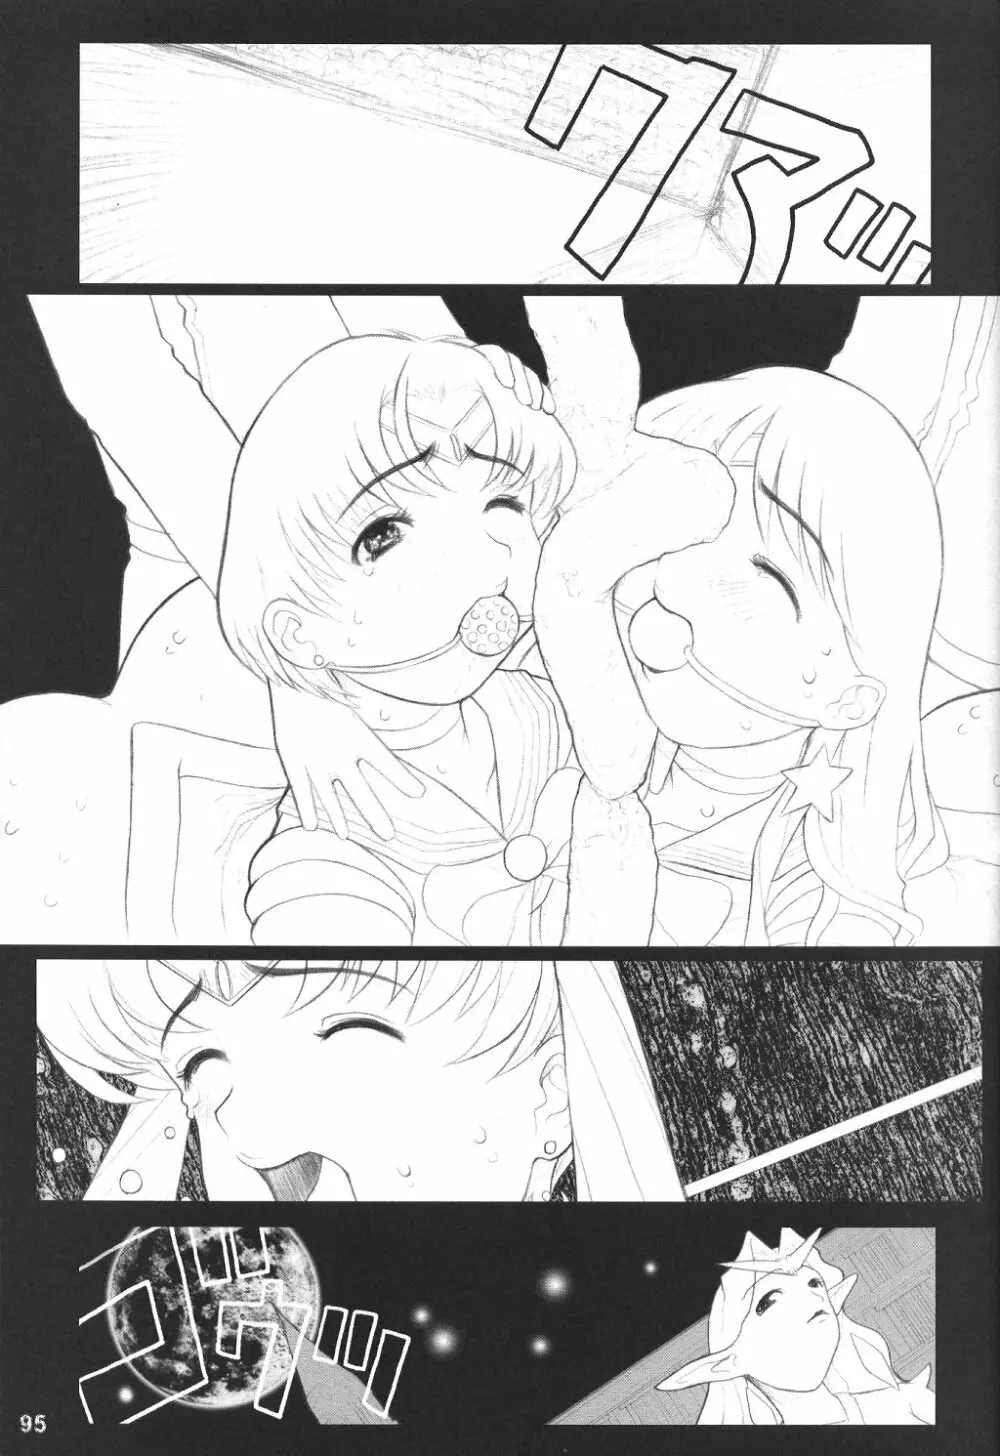 MaD ArtistS SailoR MooN - page95